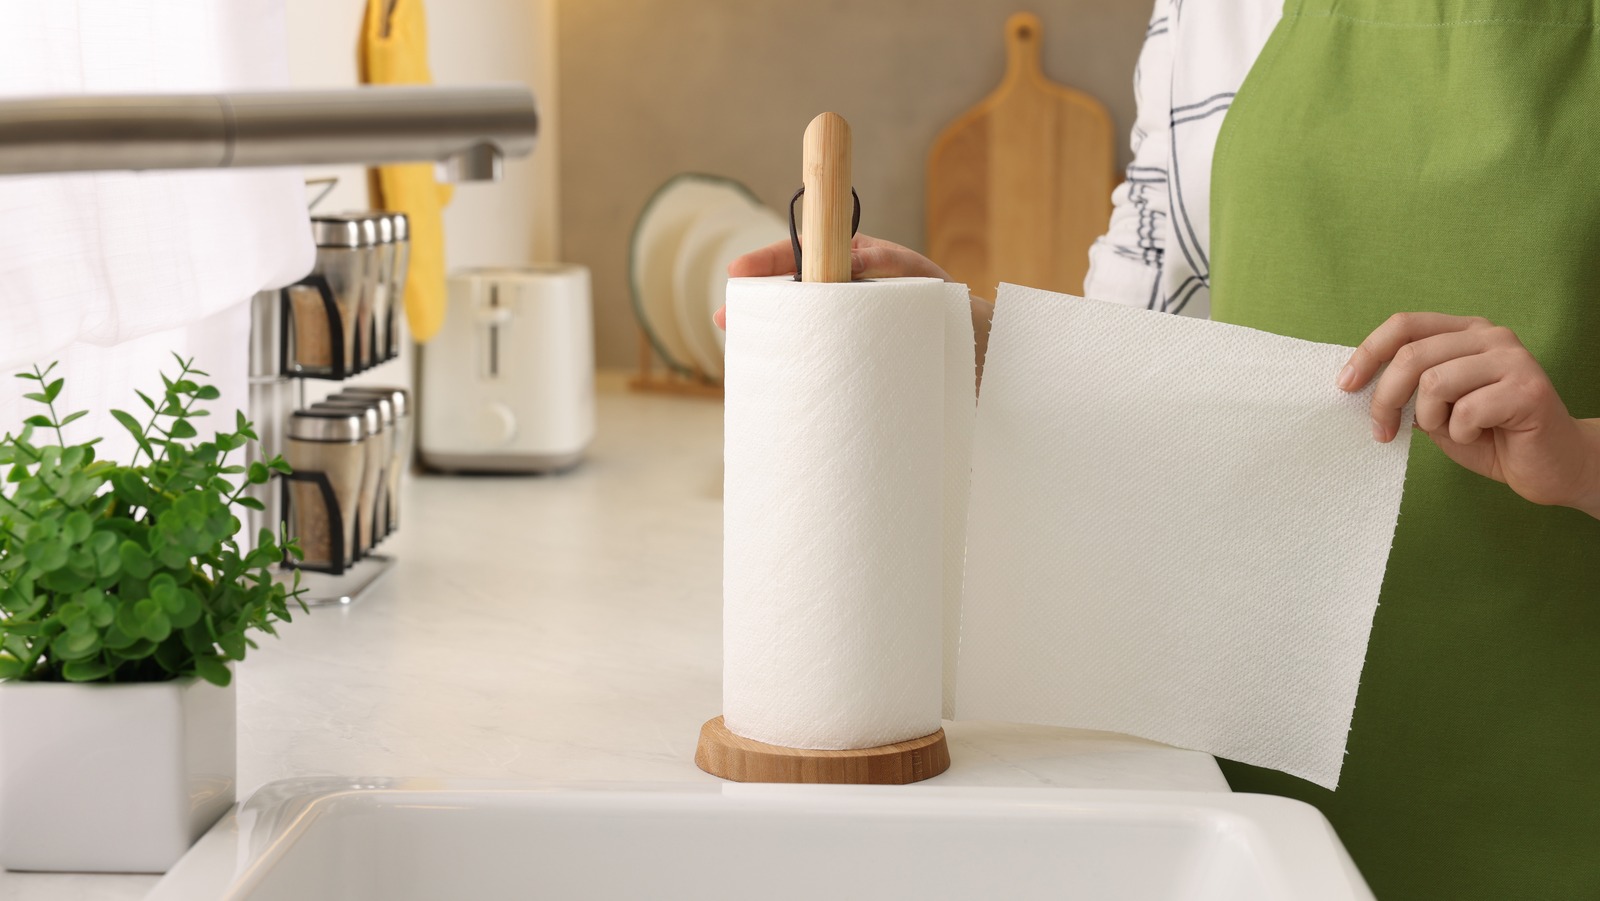 The Stylish Airbnb Paper Towel Hack That Adds Instant Charm To Your Kitchen – House Digest